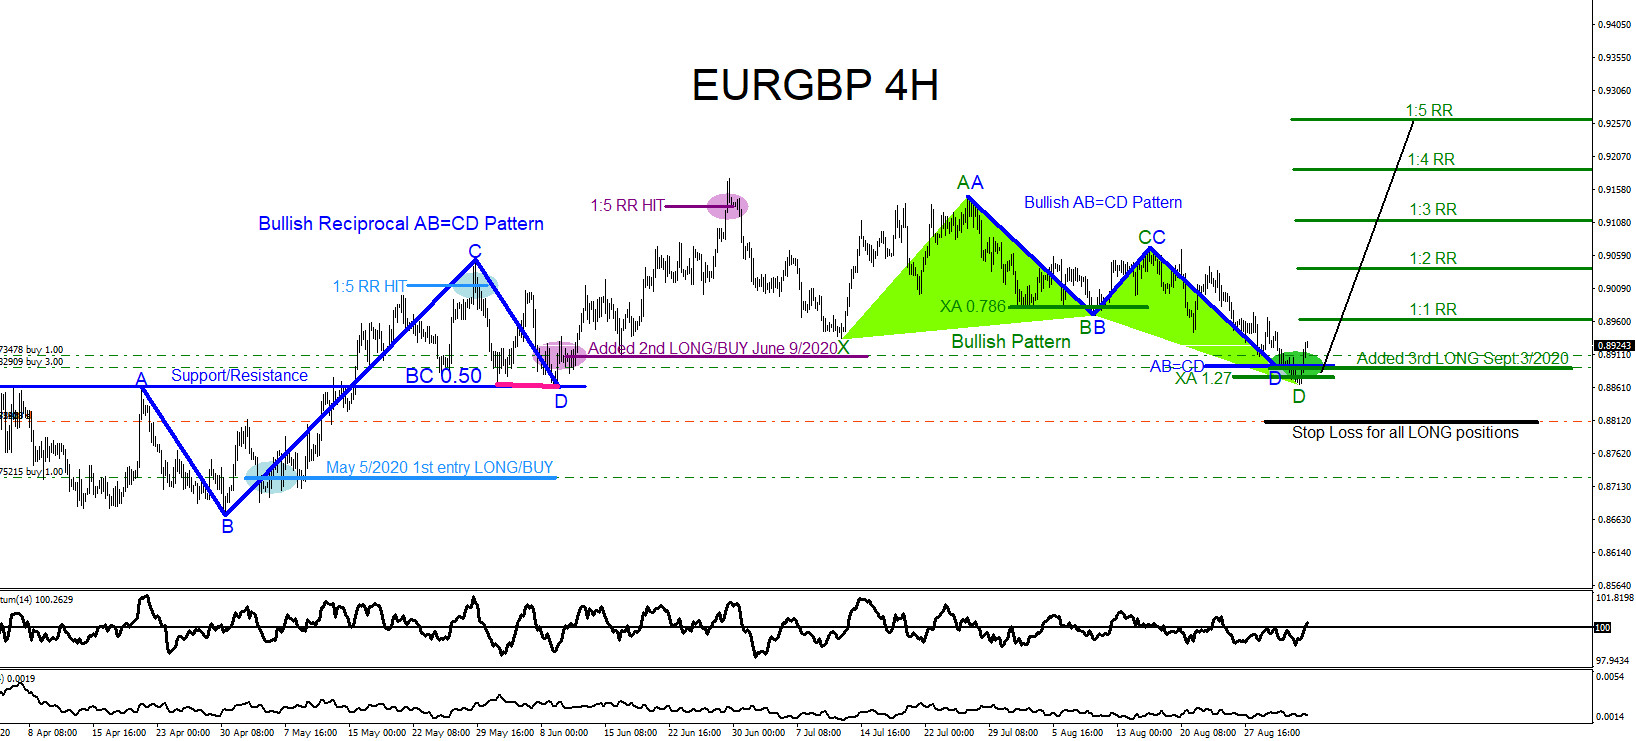 EURGBP : Using Market Patterns to Trade the Move Higher